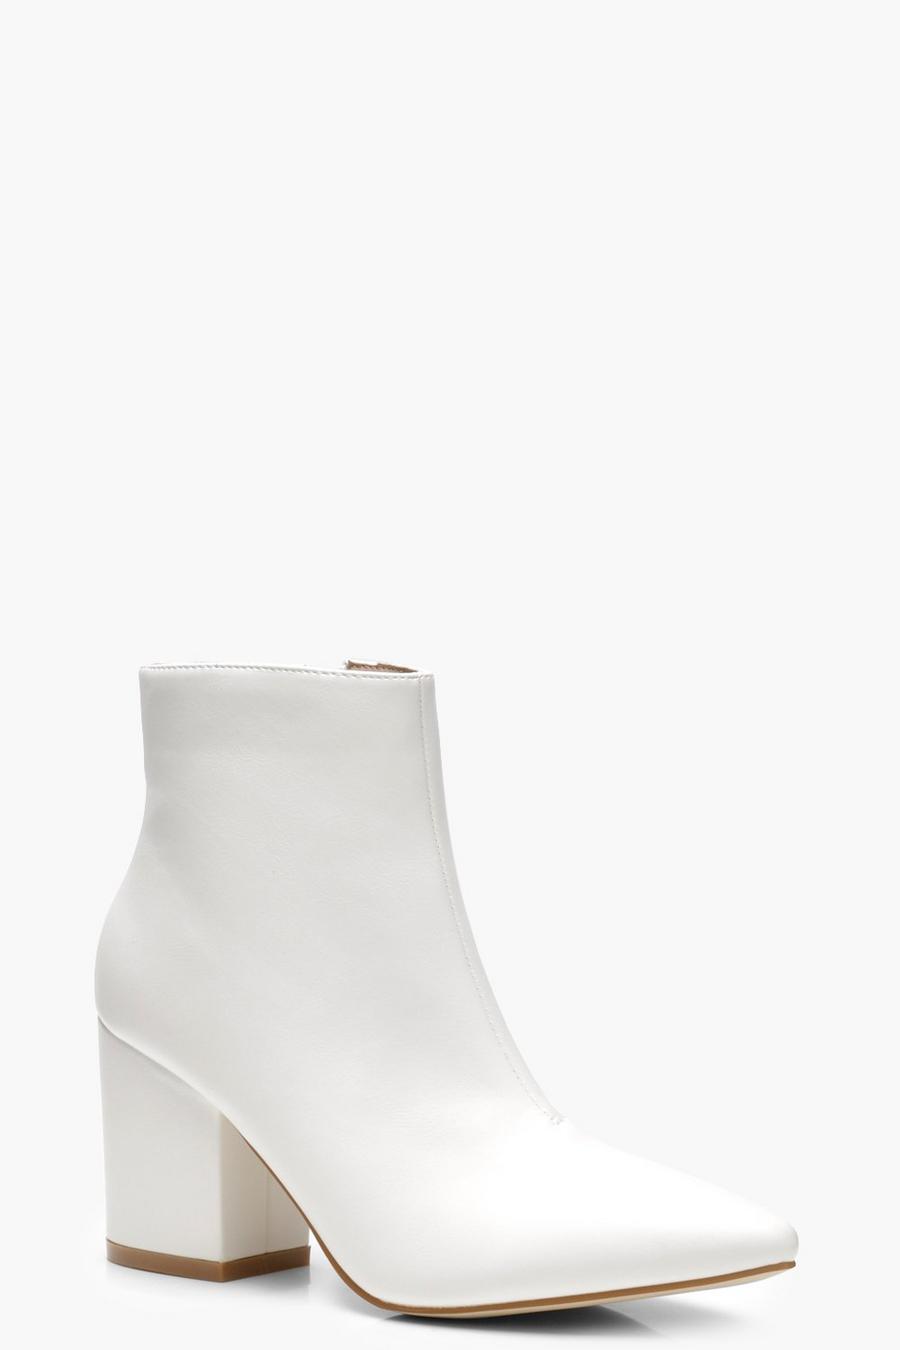 White Pointed Toe Block Heel Ankle Shoe Boots image number 1